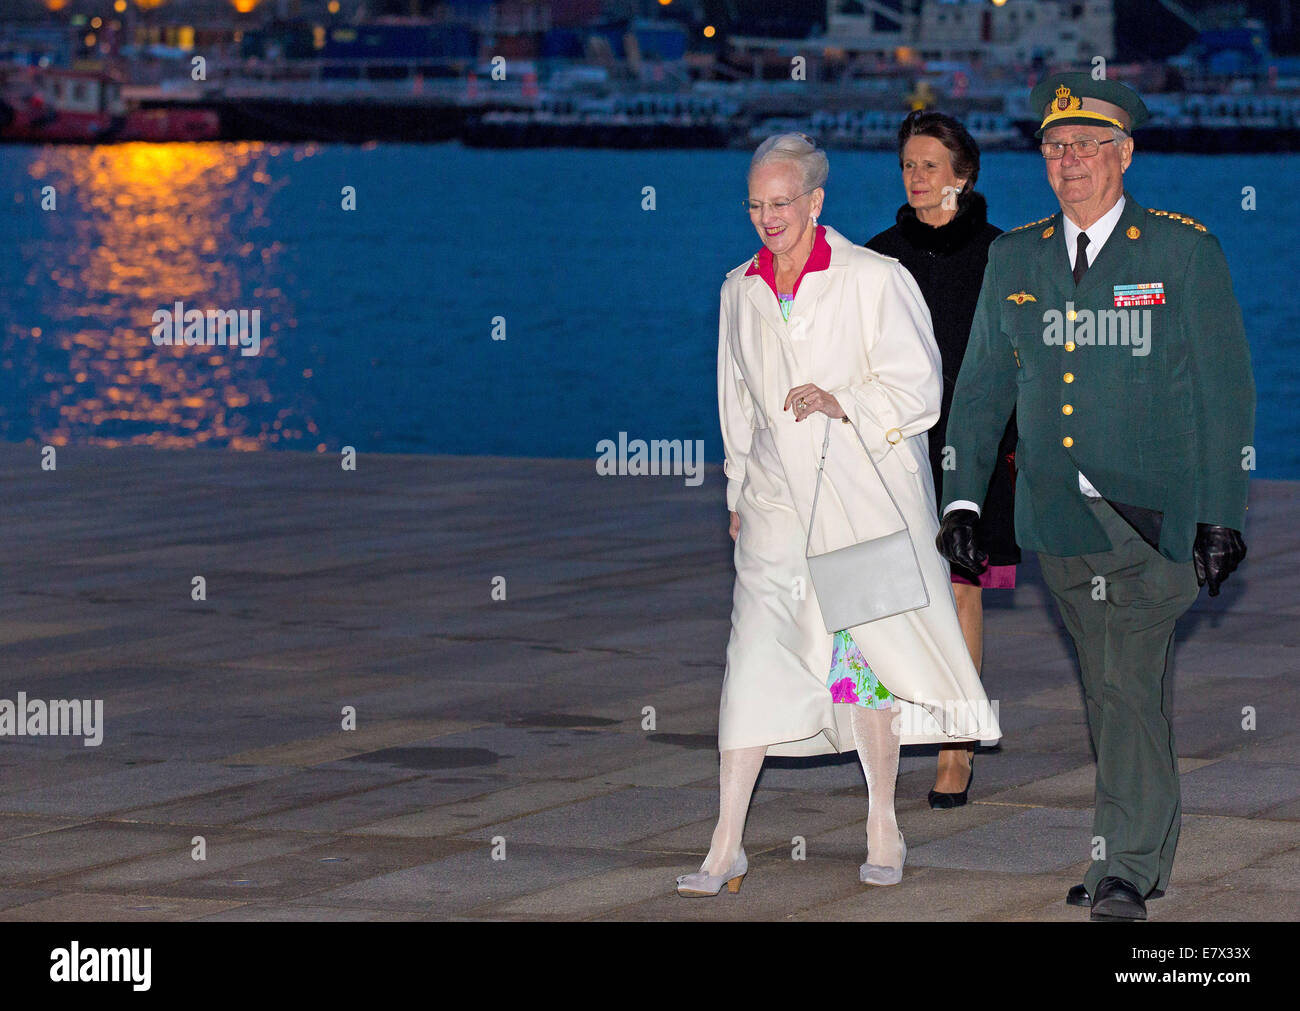 Queen Margrethe of Denmark, Prince Henrik and Princess Benedikte attend the 400th anniversary celebrations of the Danish Army at the Opera House in Copenhagen, 24 September 2014. Photo: Patrick van Katwijk/ NO WIRE SERVICE Stock Photo